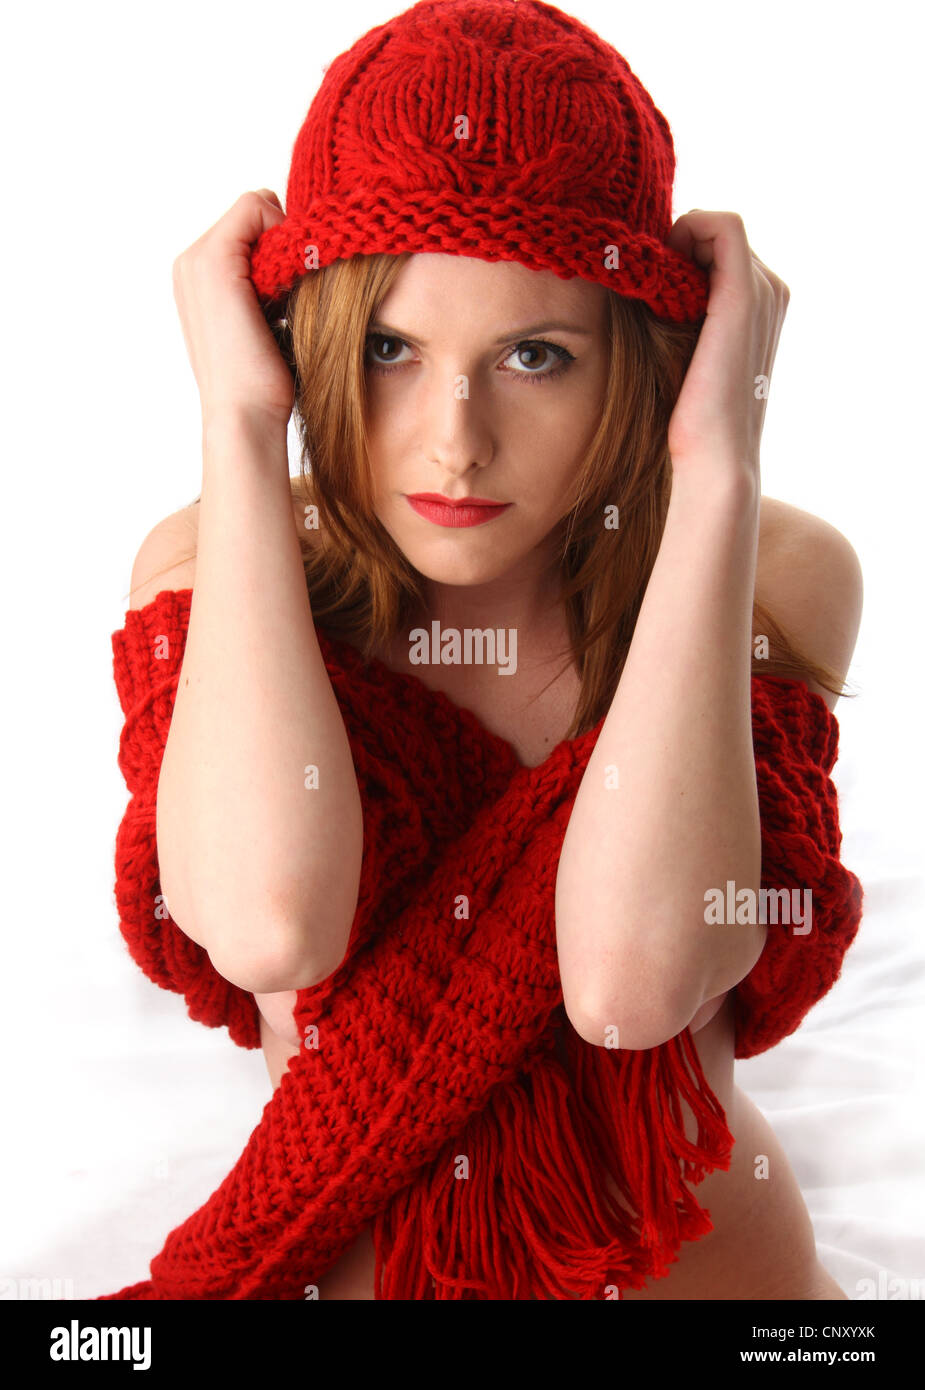 Young Romanian Woman Wearing a Red Woolen Scarf and Hat. Studio Fashion Images with a White Background. Stock Photo